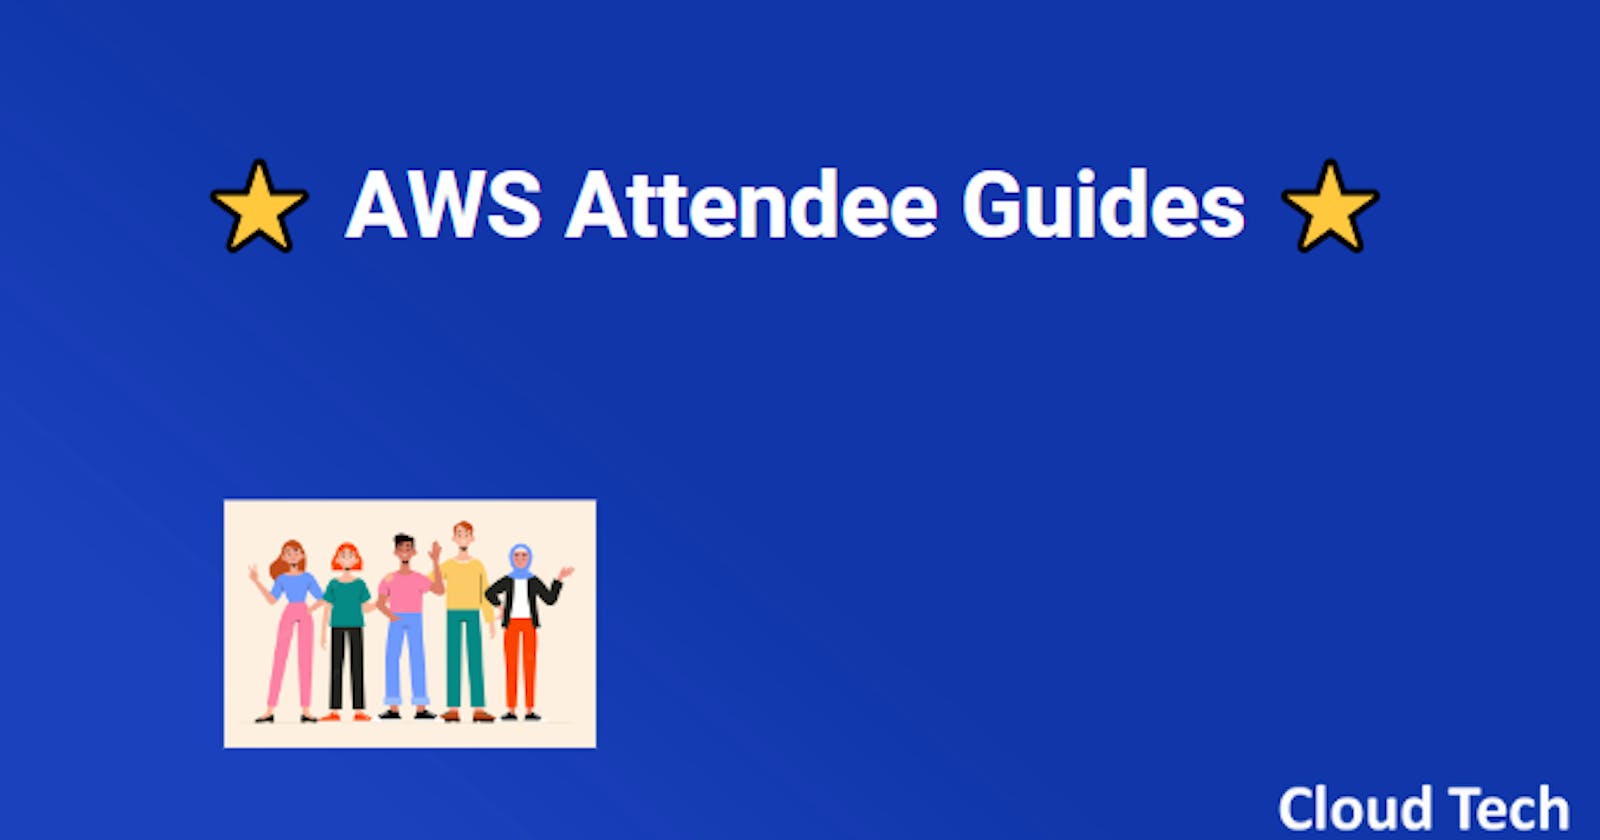 ⭐ AWS Attendee Guides ⭐